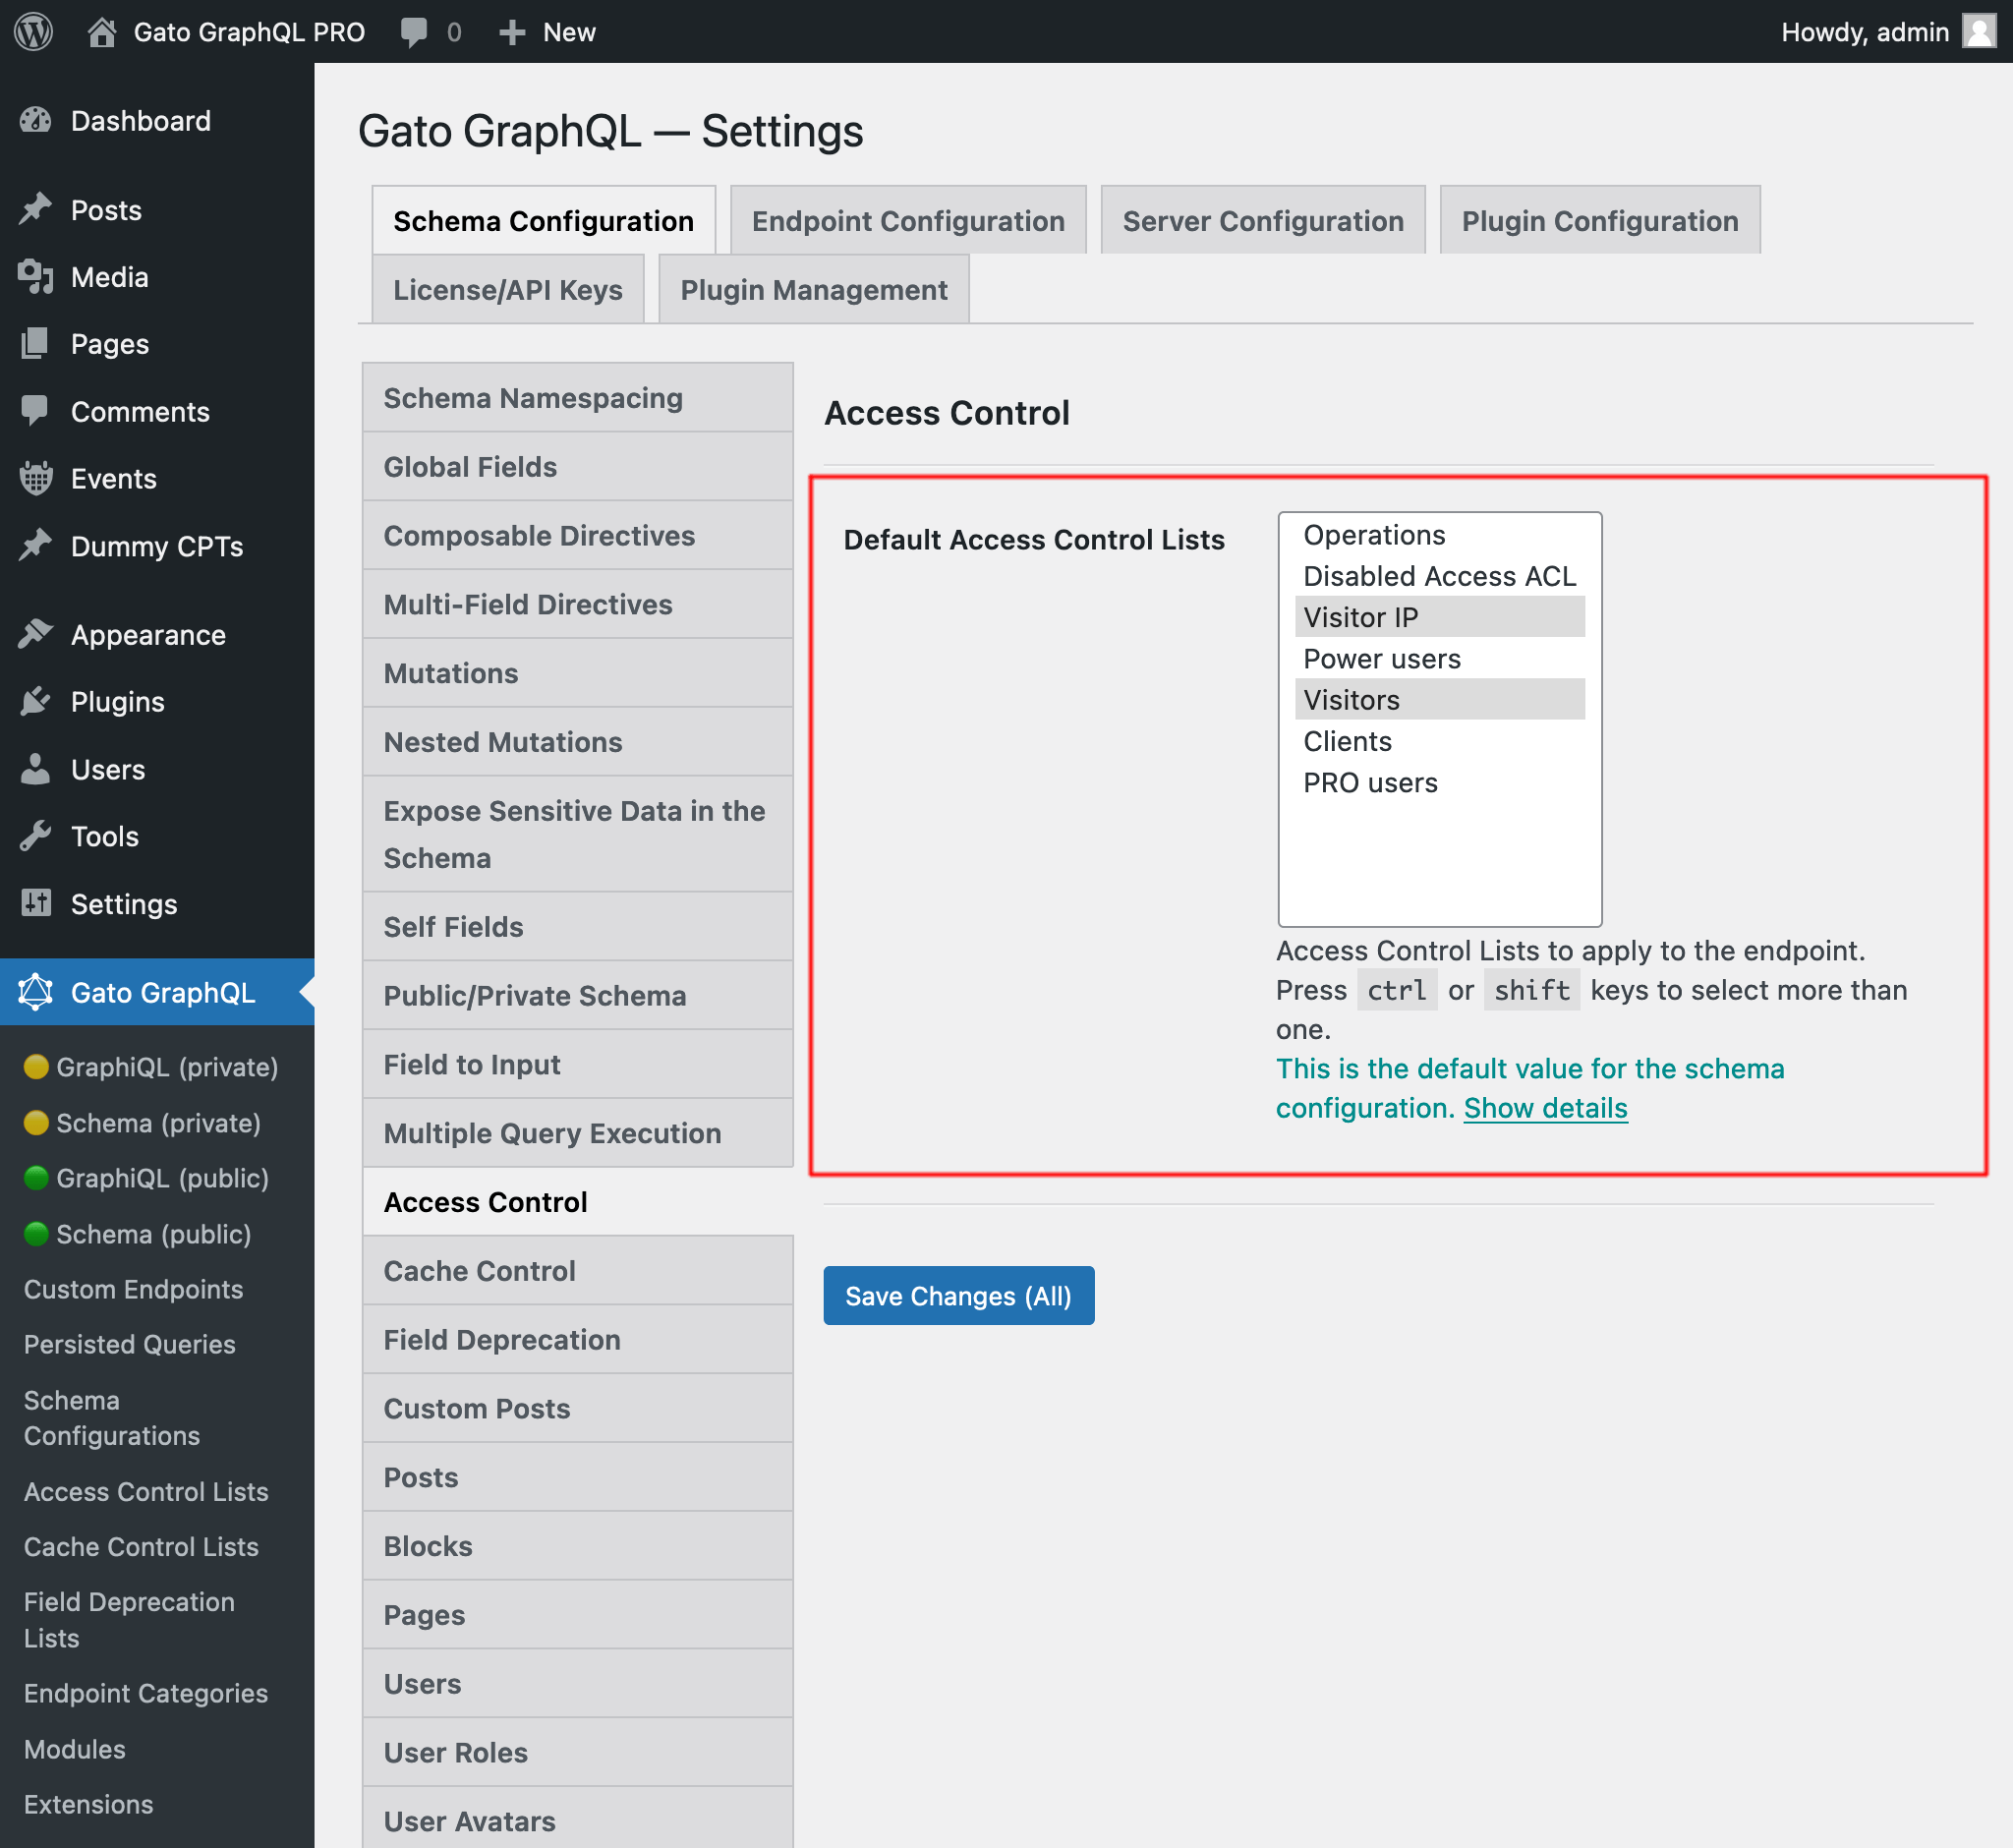 Selecting the default Access Control Lists in the Settings page